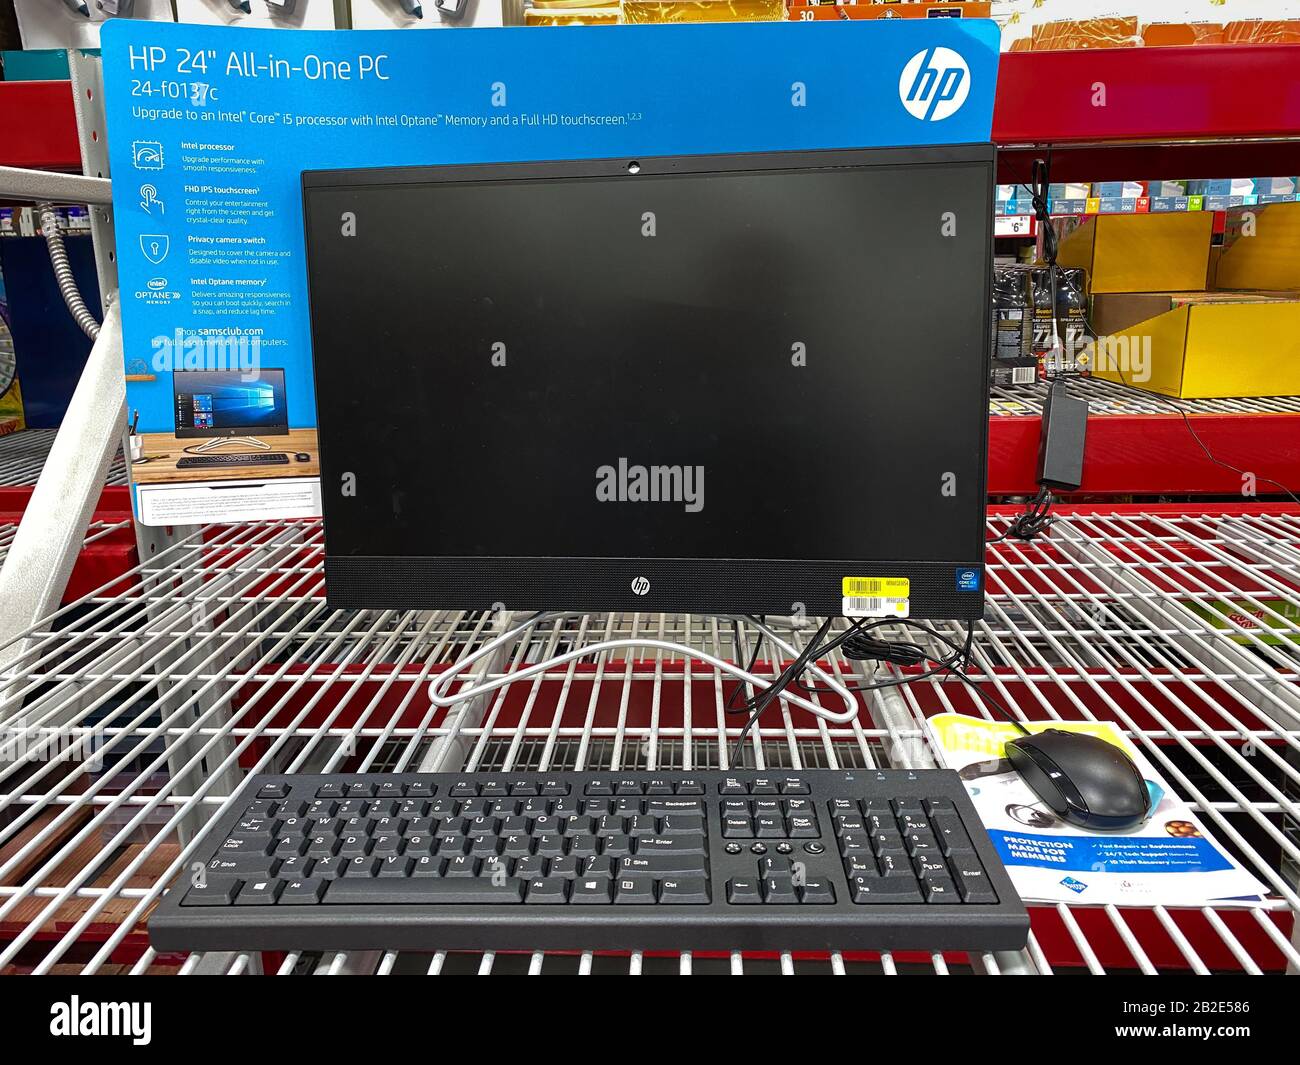 Orlando, FL/USA-2/13/20: A Hewlett Packard HP All-in-One PC on display at a Sams Club retail store techonolgy department waiting for a customer to pur Stock Photo